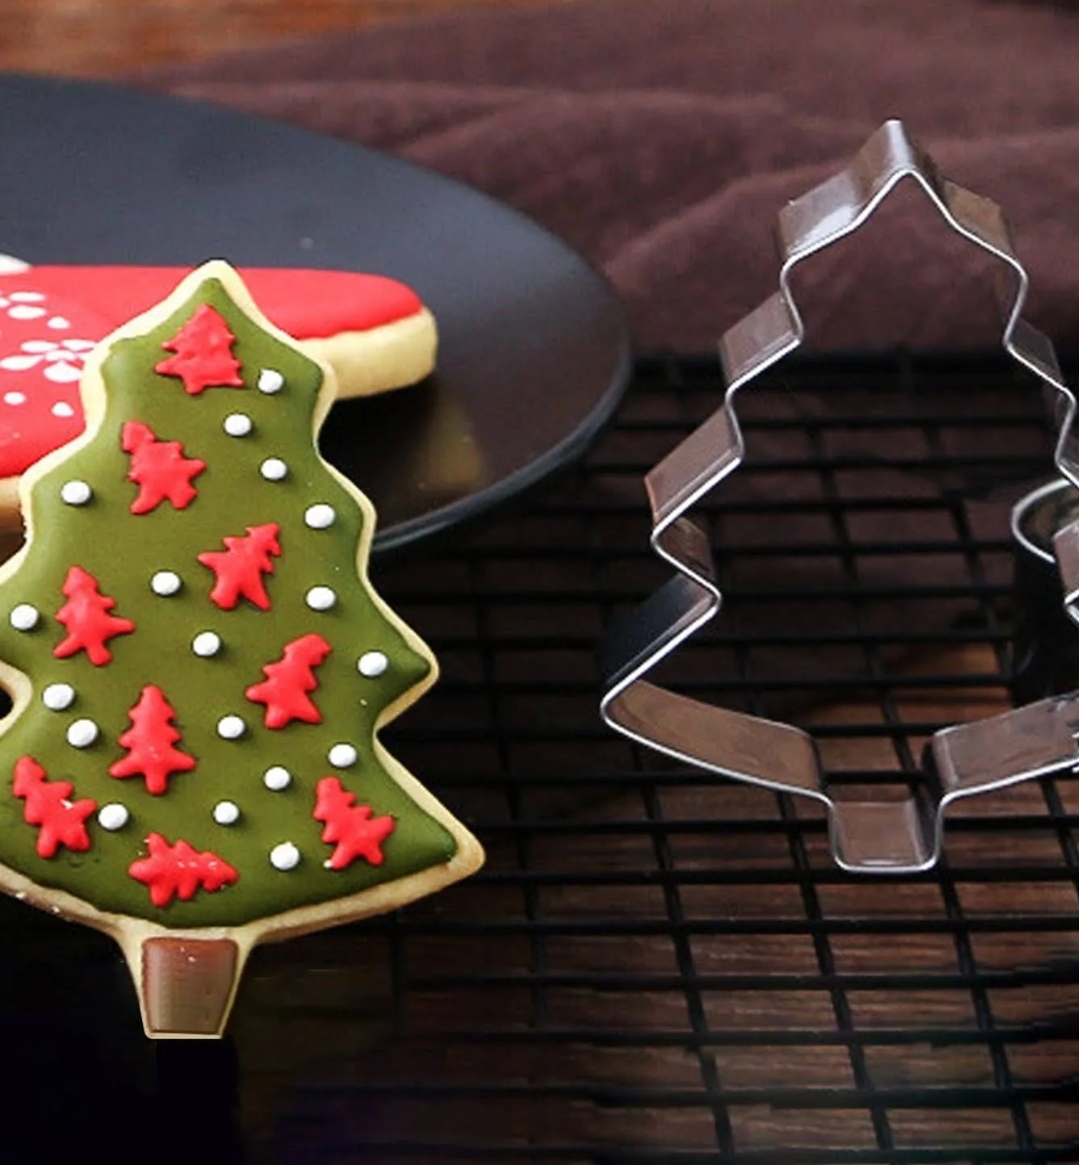 14 Piece Cookie Cutter Set For Christmasand/Festive Holidays; with 100 Cookie Gift Bags Included.